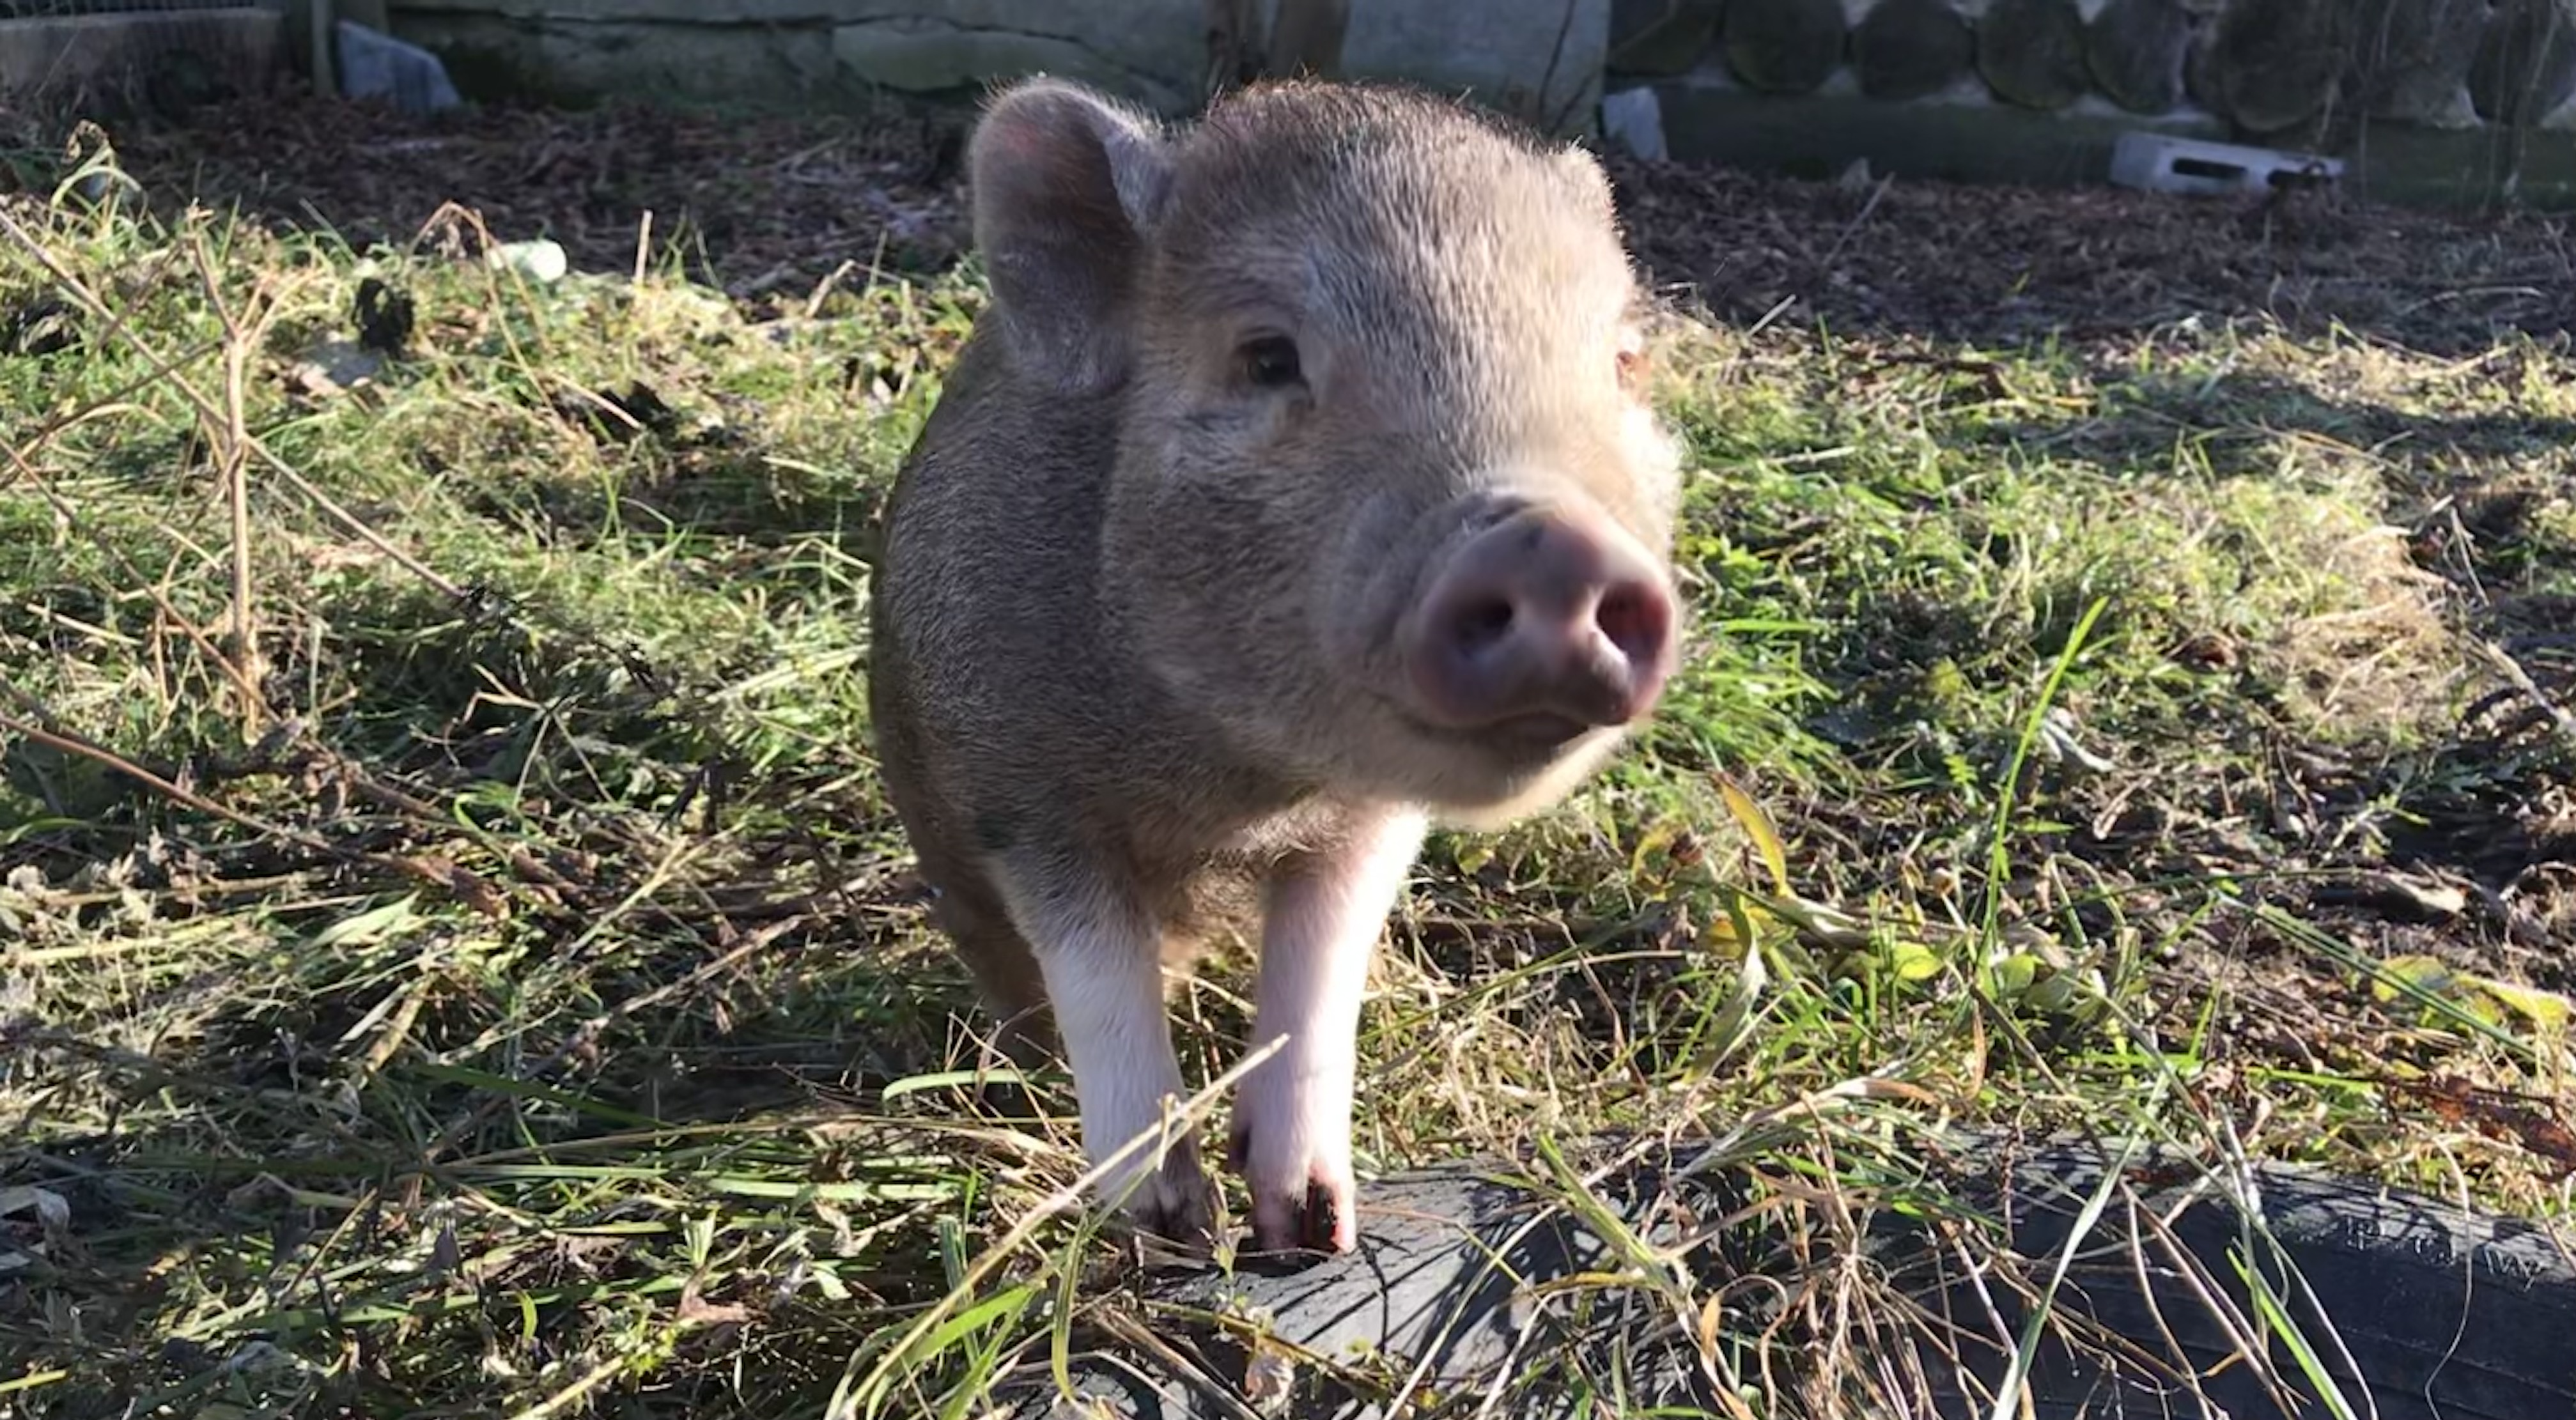 10 Things To Consider Before Adopting a Mini Pig